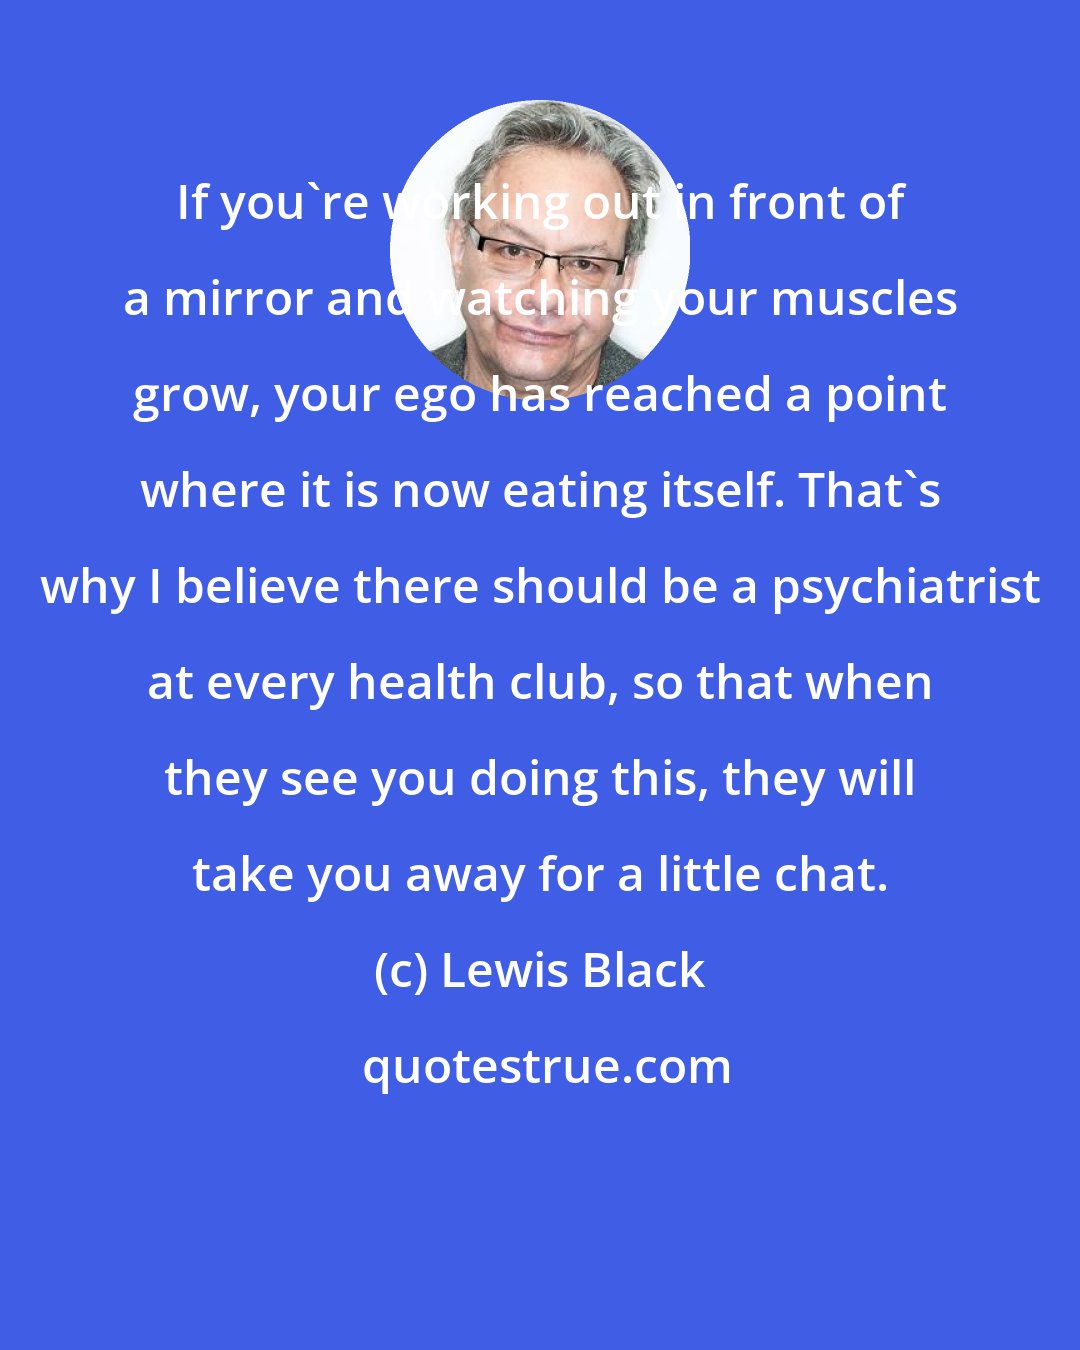 Lewis Black: If you're working out in front of a mirror and watching your muscles grow, your ego has reached a point where it is now eating itself. That's why I believe there should be a psychiatrist at every health club, so that when they see you doing this, they will take you away for a little chat.